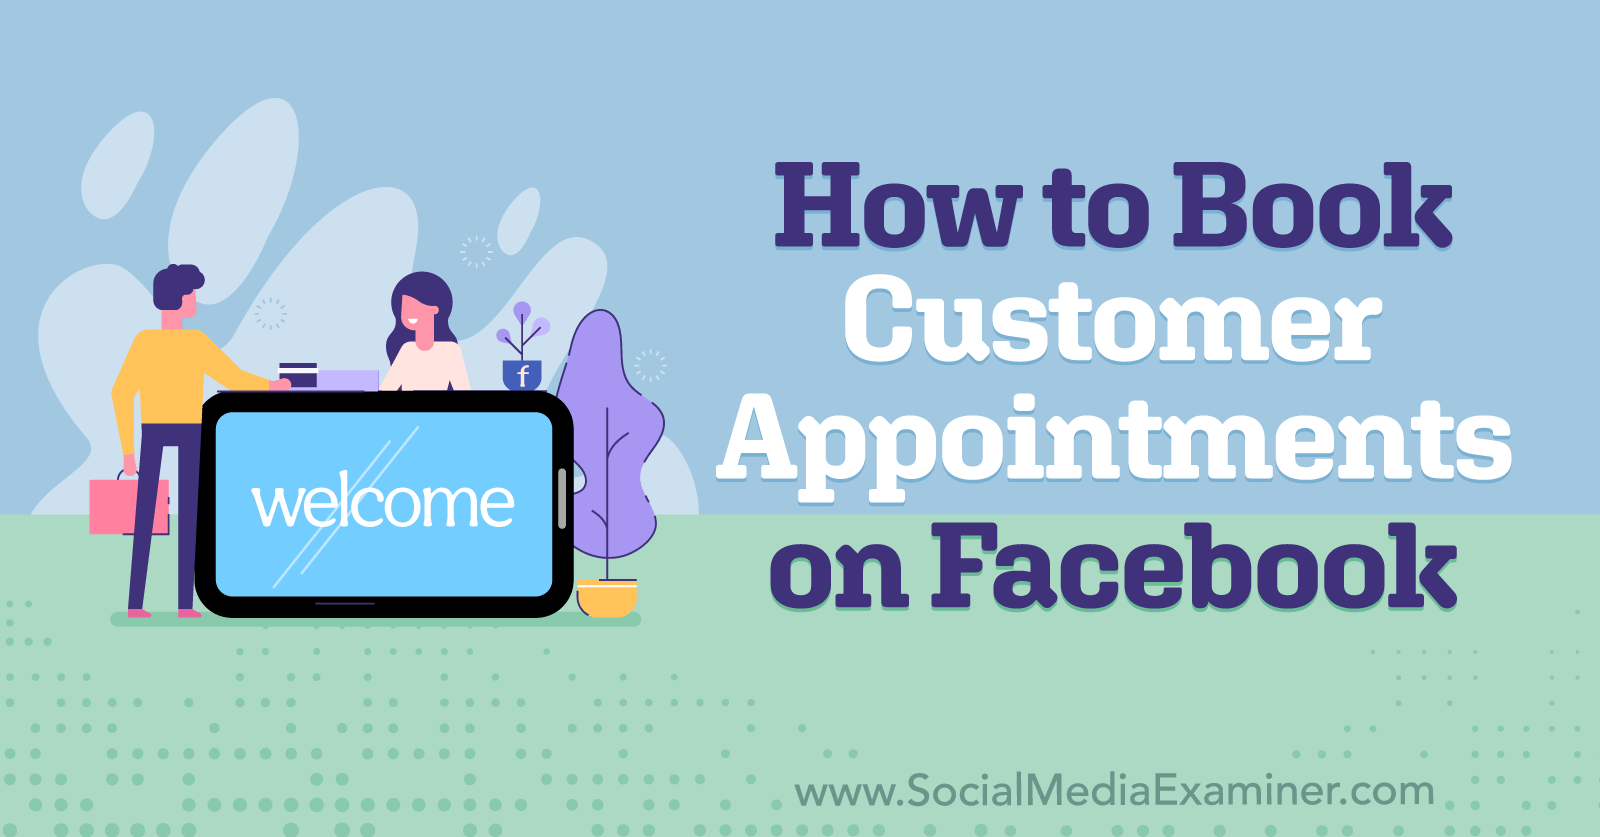 How to Book Customer Appointments on Facebook-Social Media Examiner